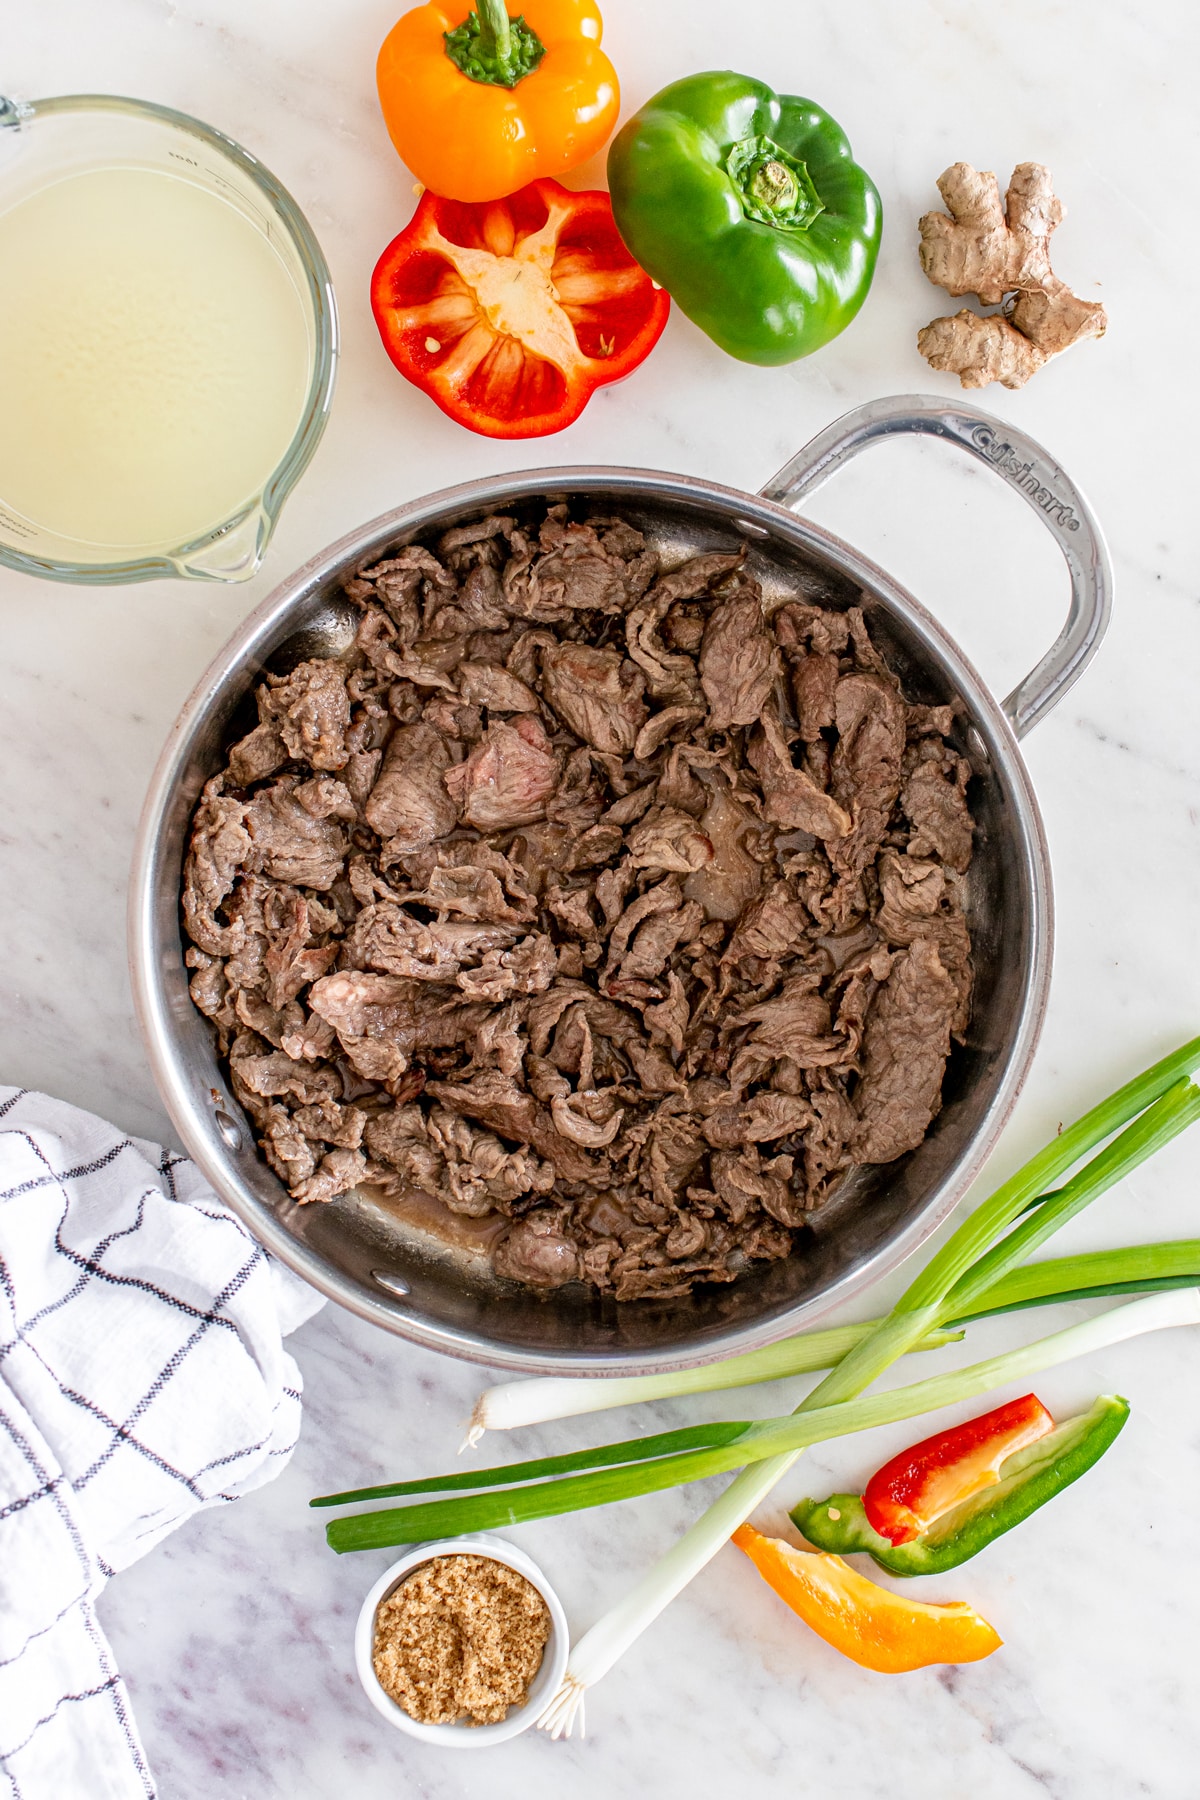 Sautéed beef in a pan surrounded by ingredients like bell peppers, ginger, green onions, and brown sugar.